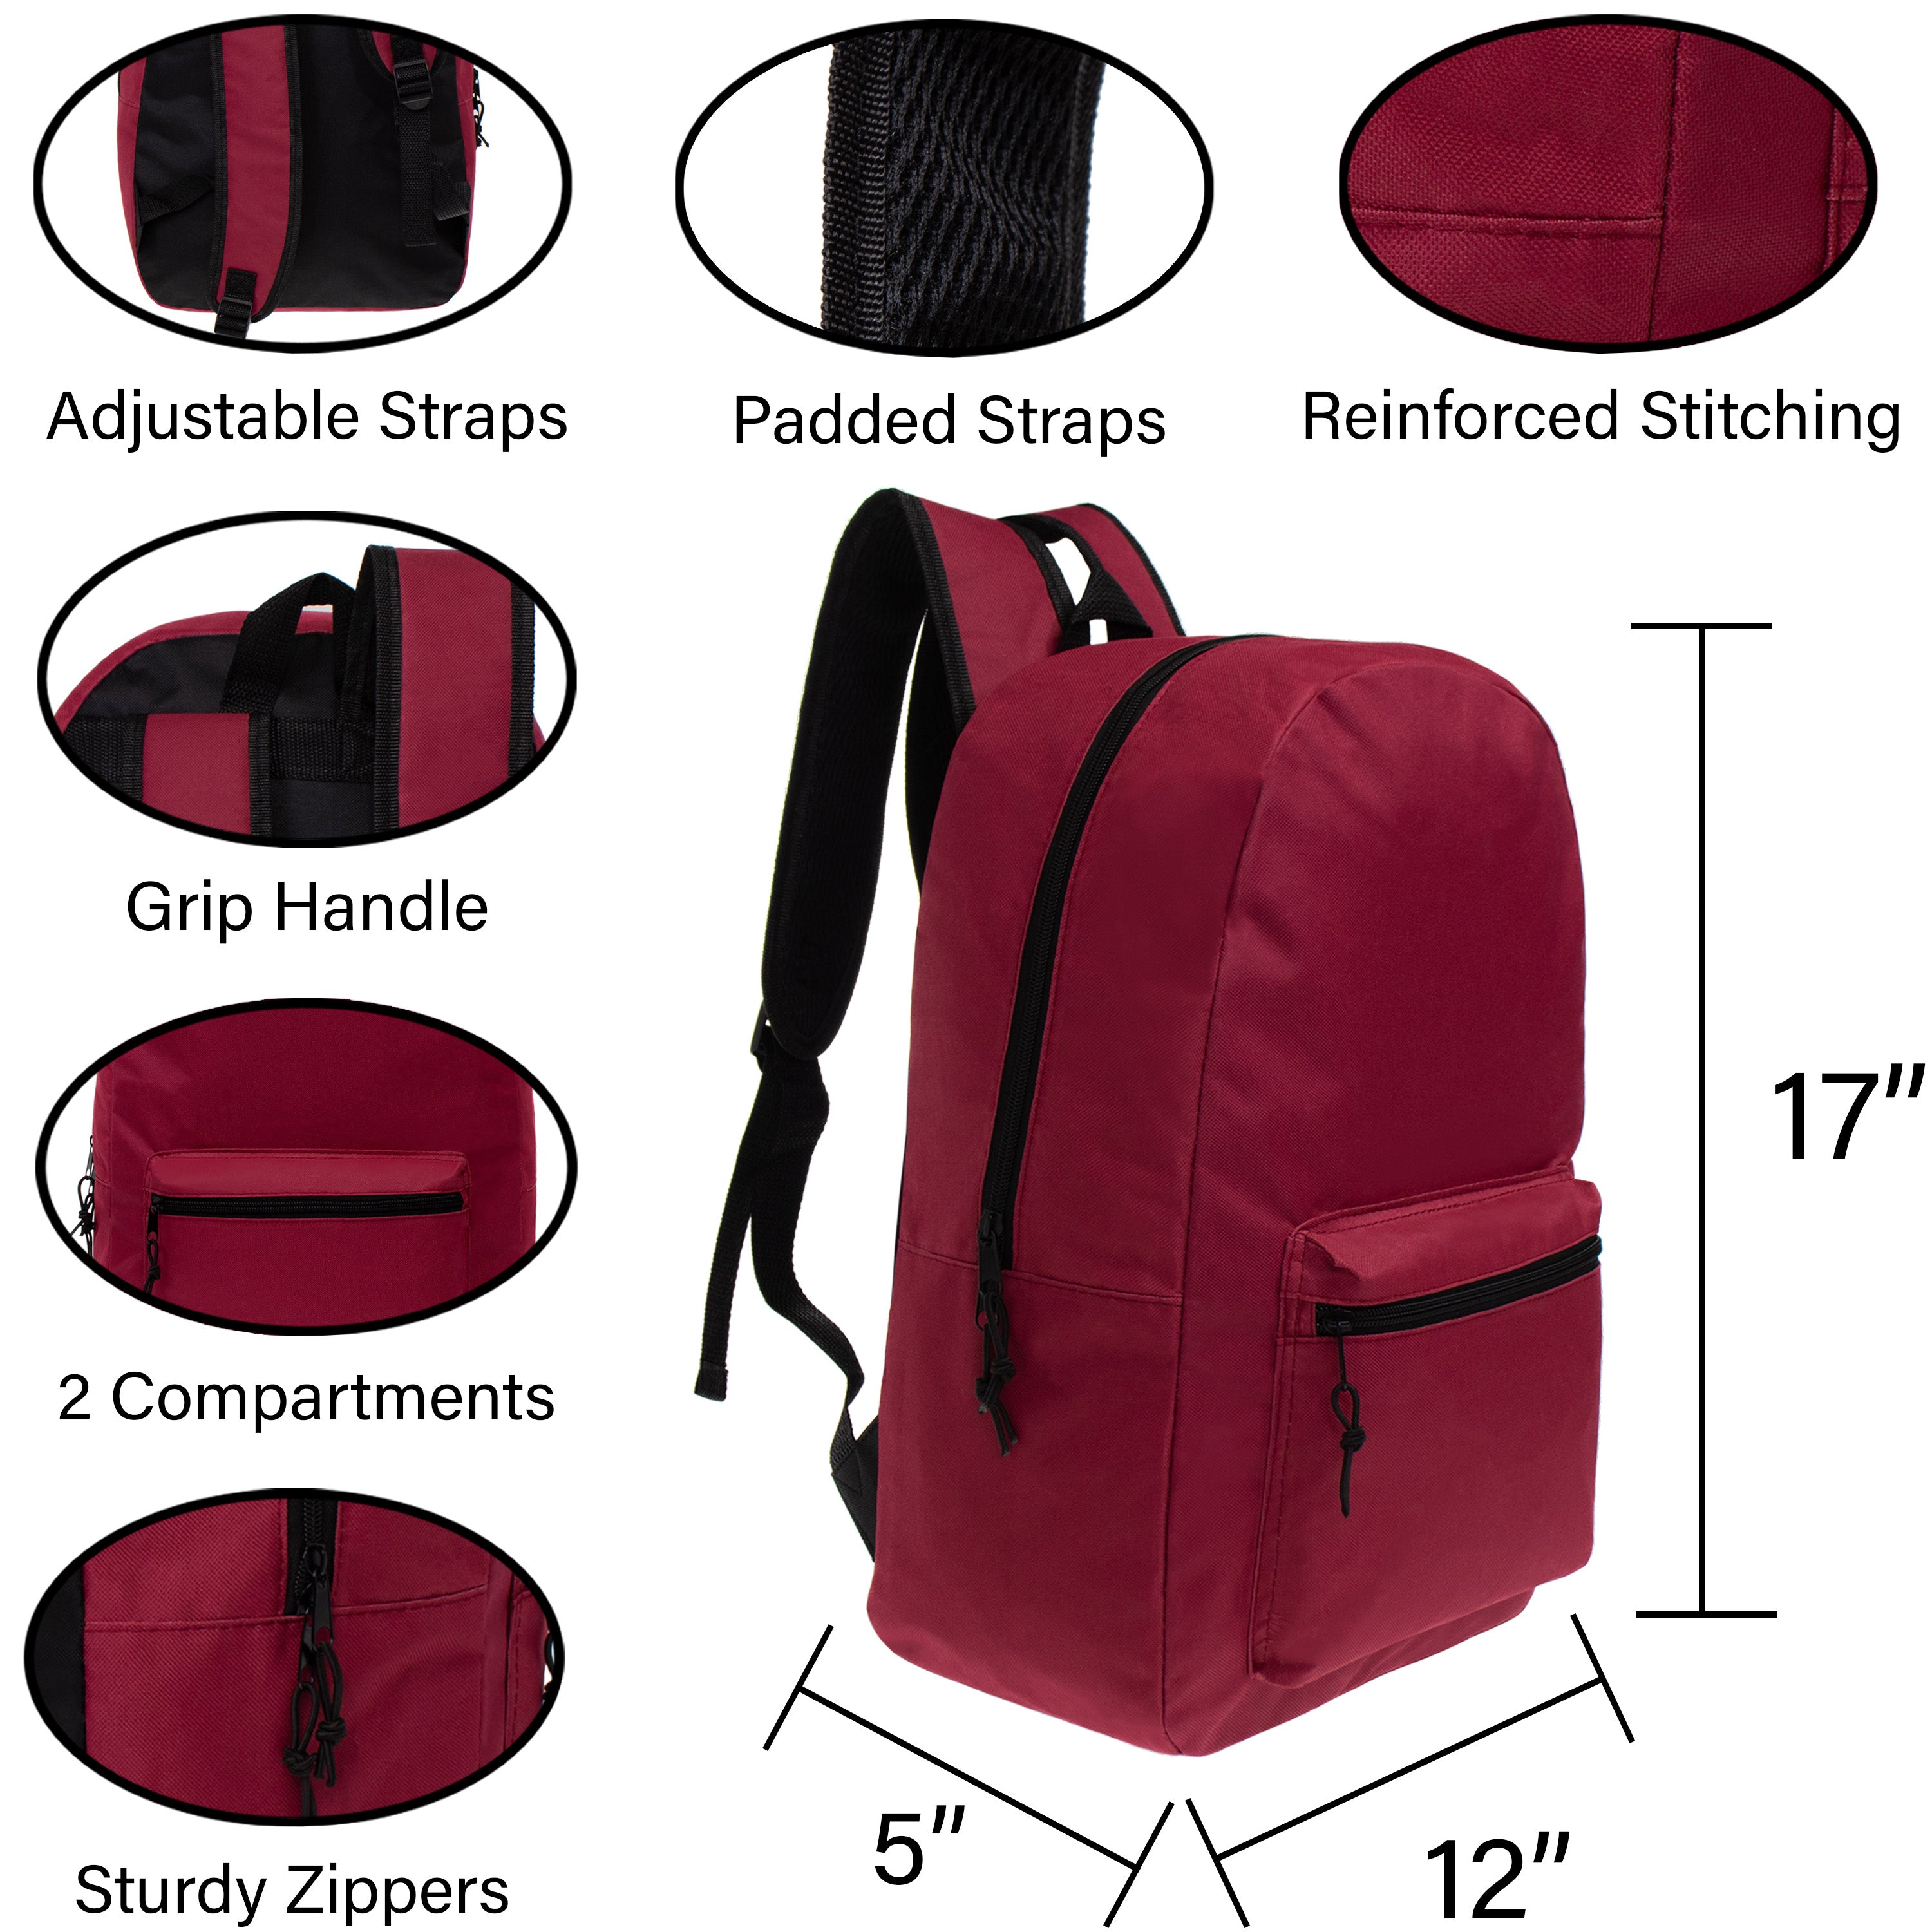 24 Wholesale 16 Inch Backpack With Matching Lunch Bag - Boys - at 